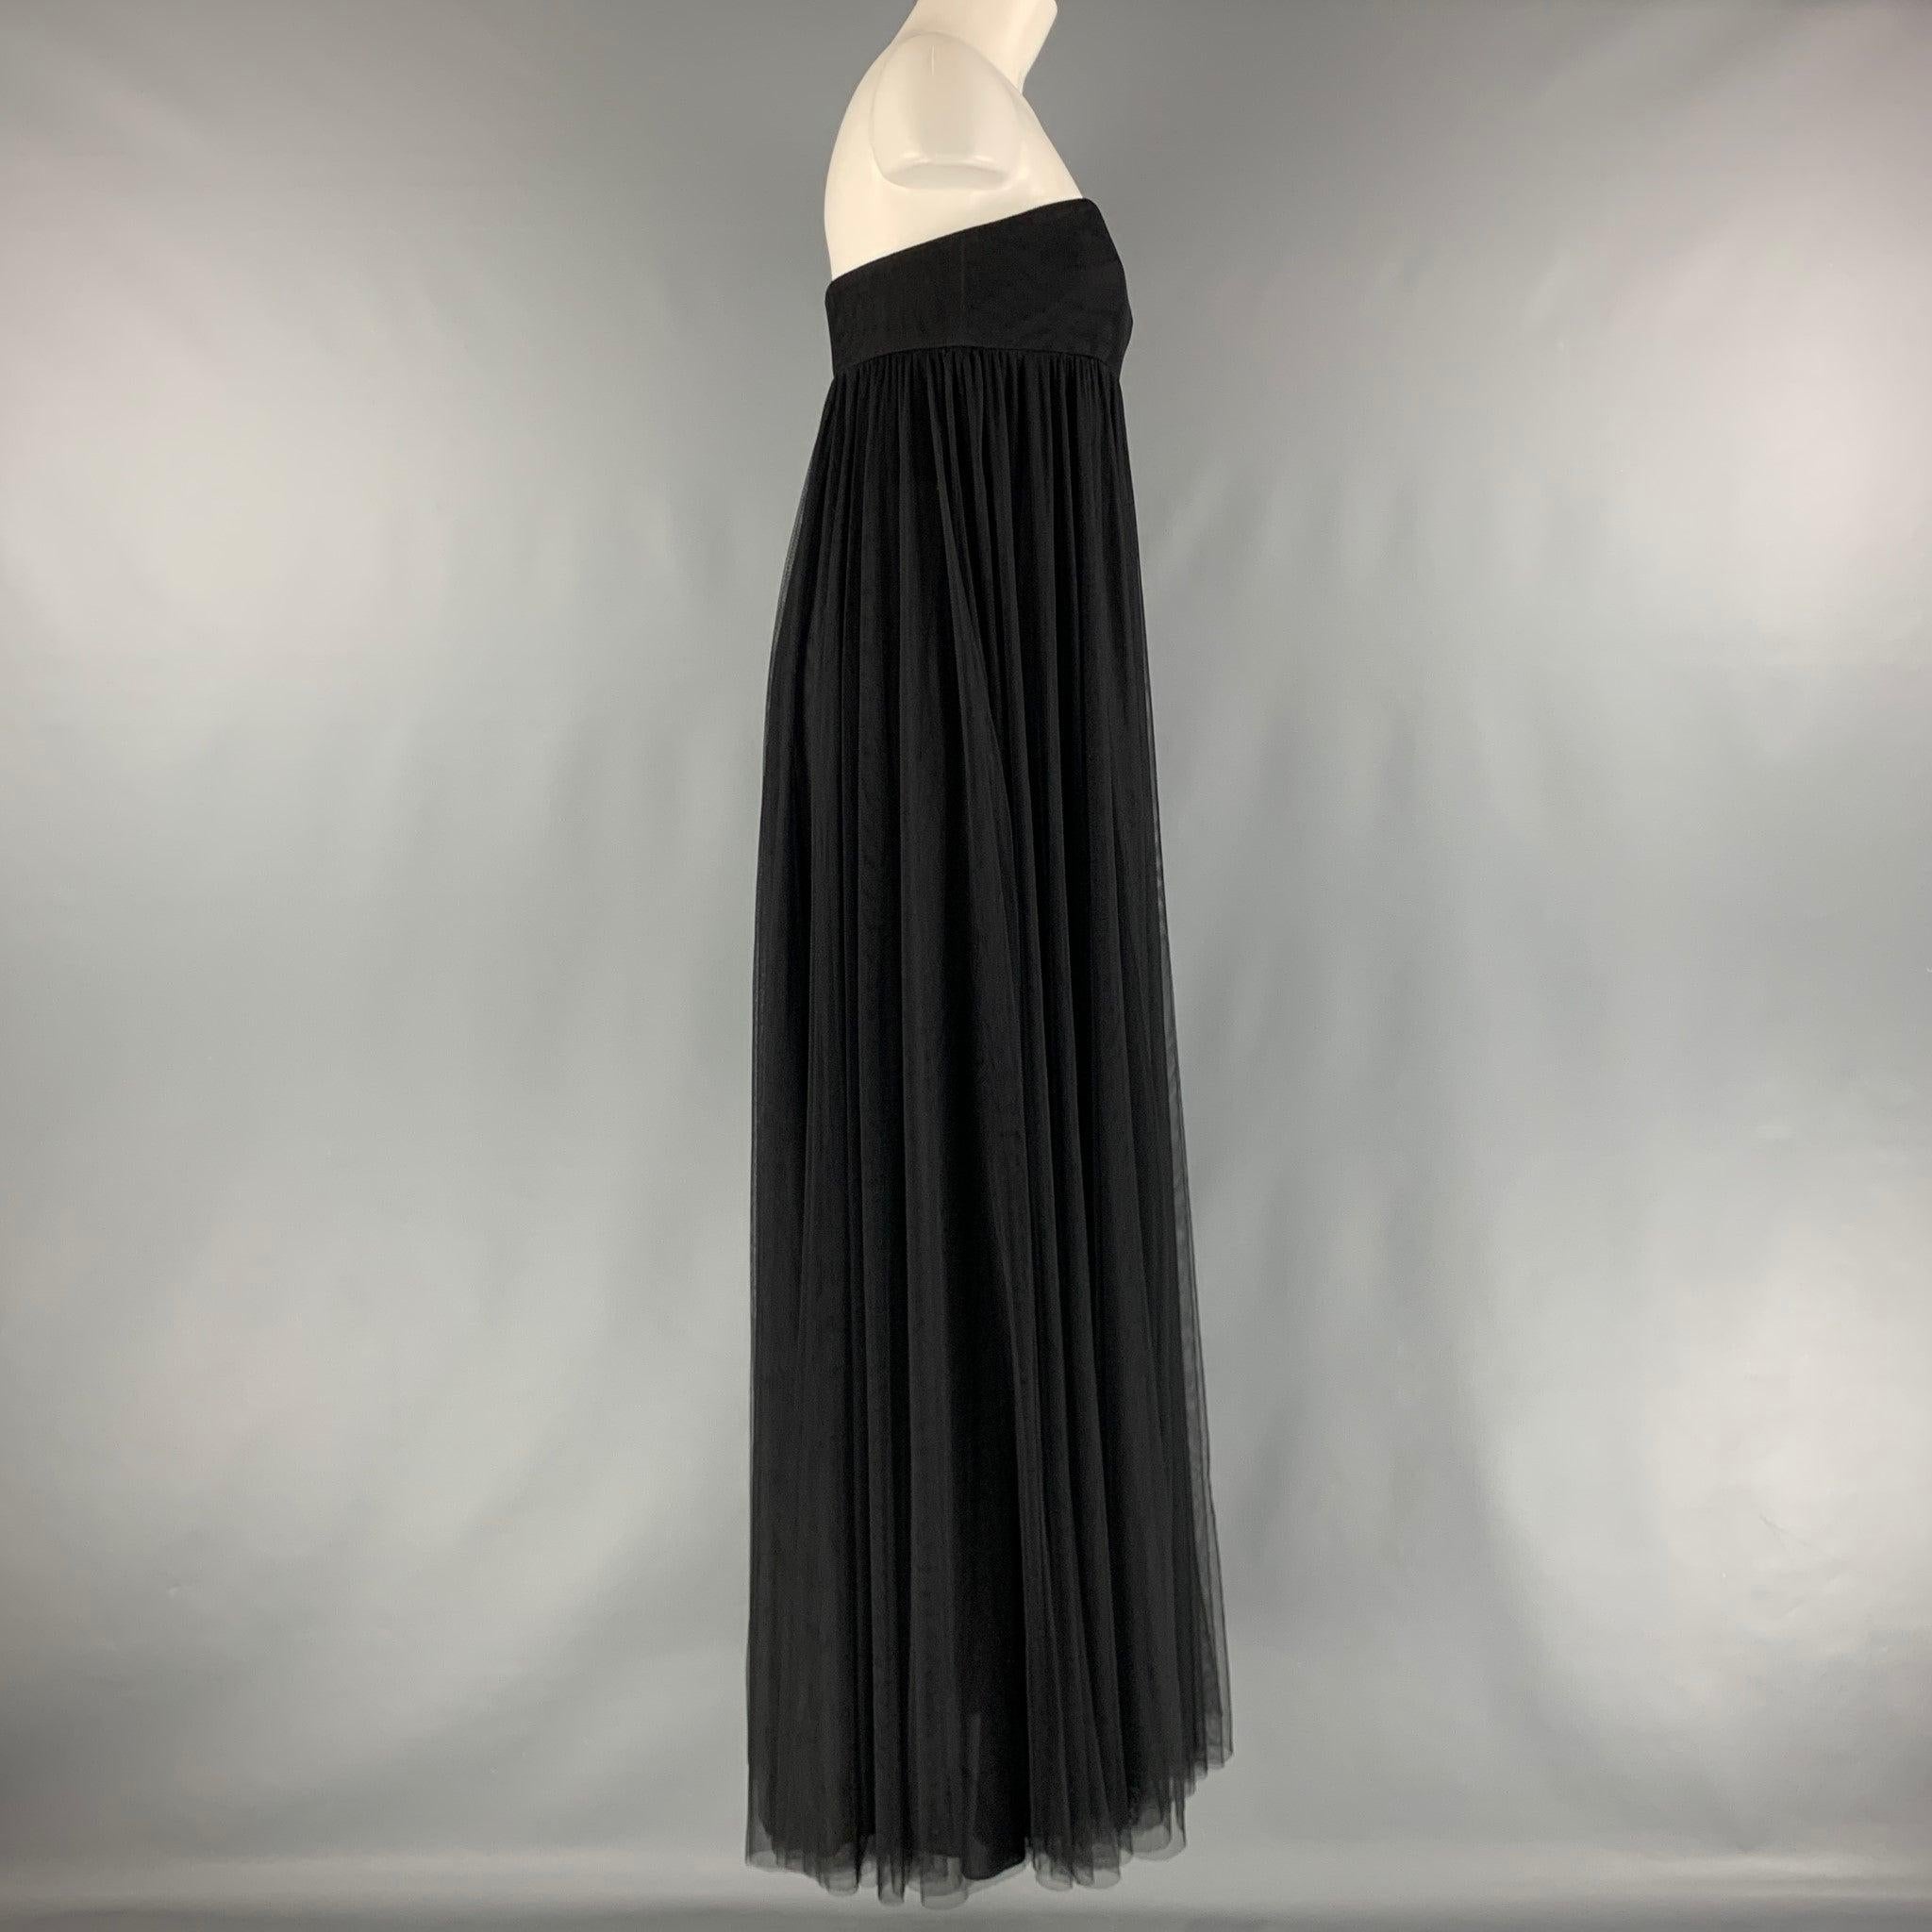 VERA WANG COLLECTION long dress comes in a black mesh polyester material featuring a strapless style, corset lining, empire waits style, and a side zipper closure.Excellent Pre-Owned Condition. 

Marked:  6 

Measurements: 
 Bust: 30 inches Waist: